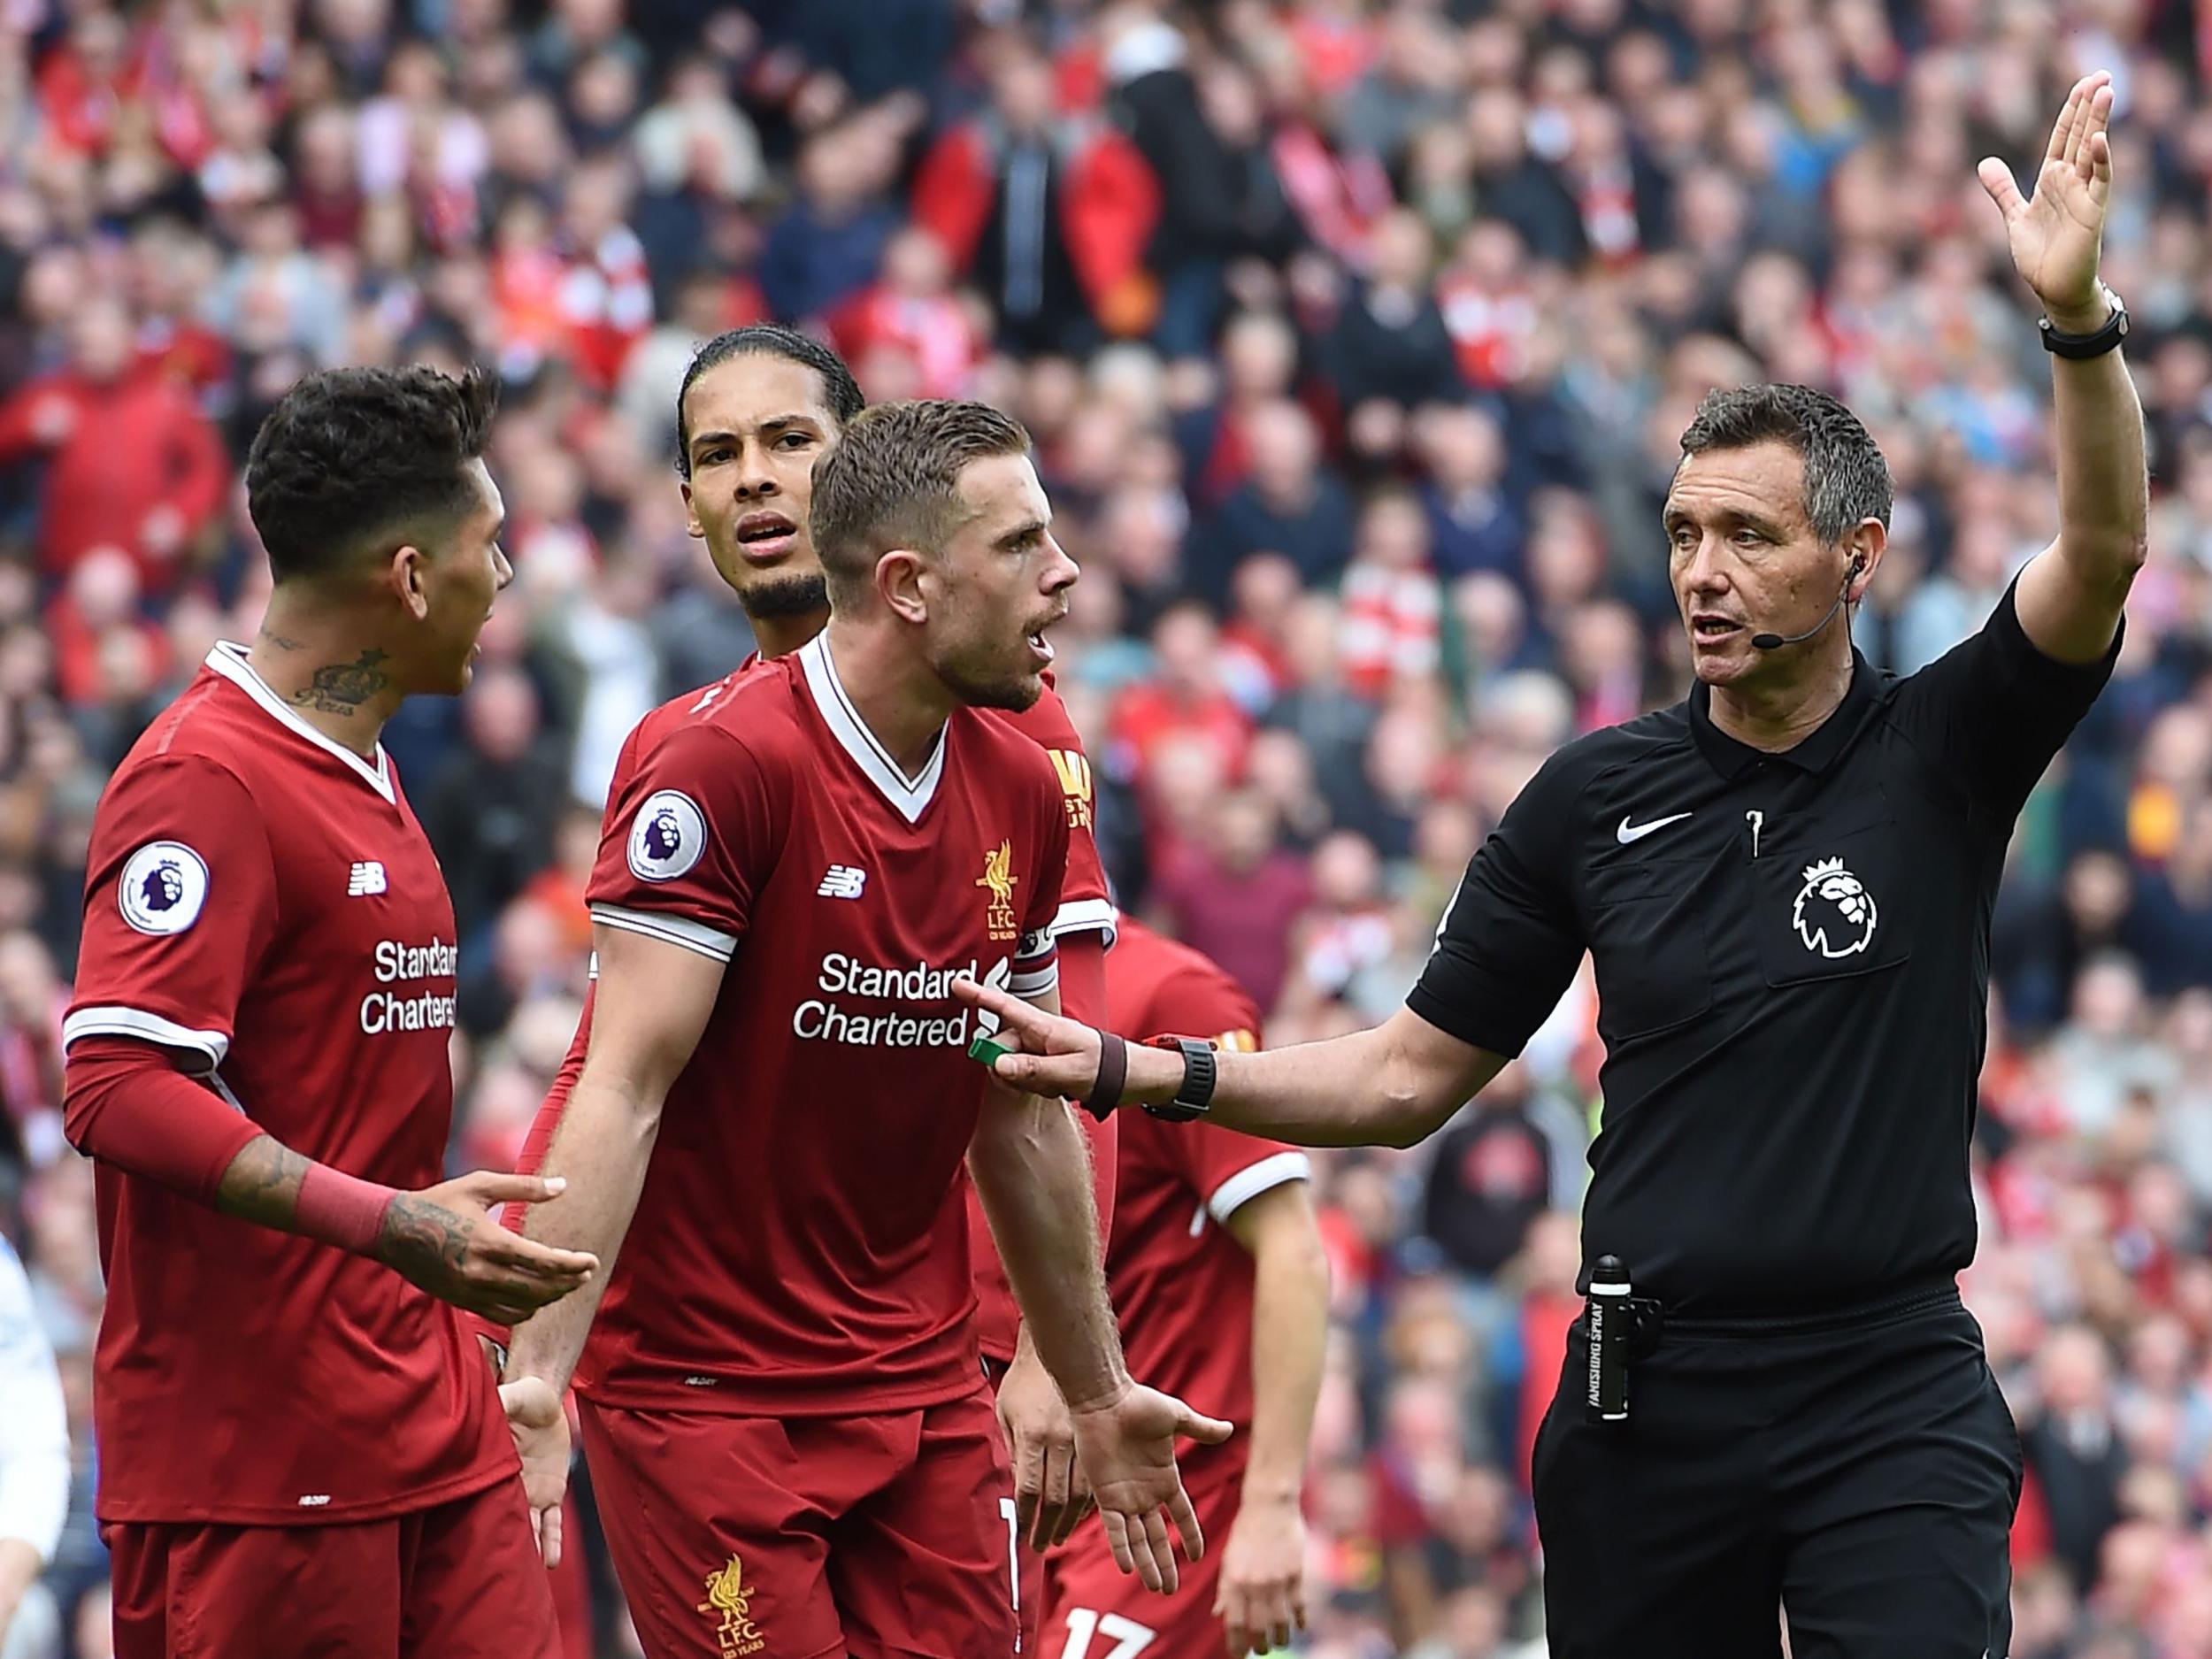 Liverpool get all the decisions at Anfield, right? Jurgen Klopp isn't happy with how many penalties his team get